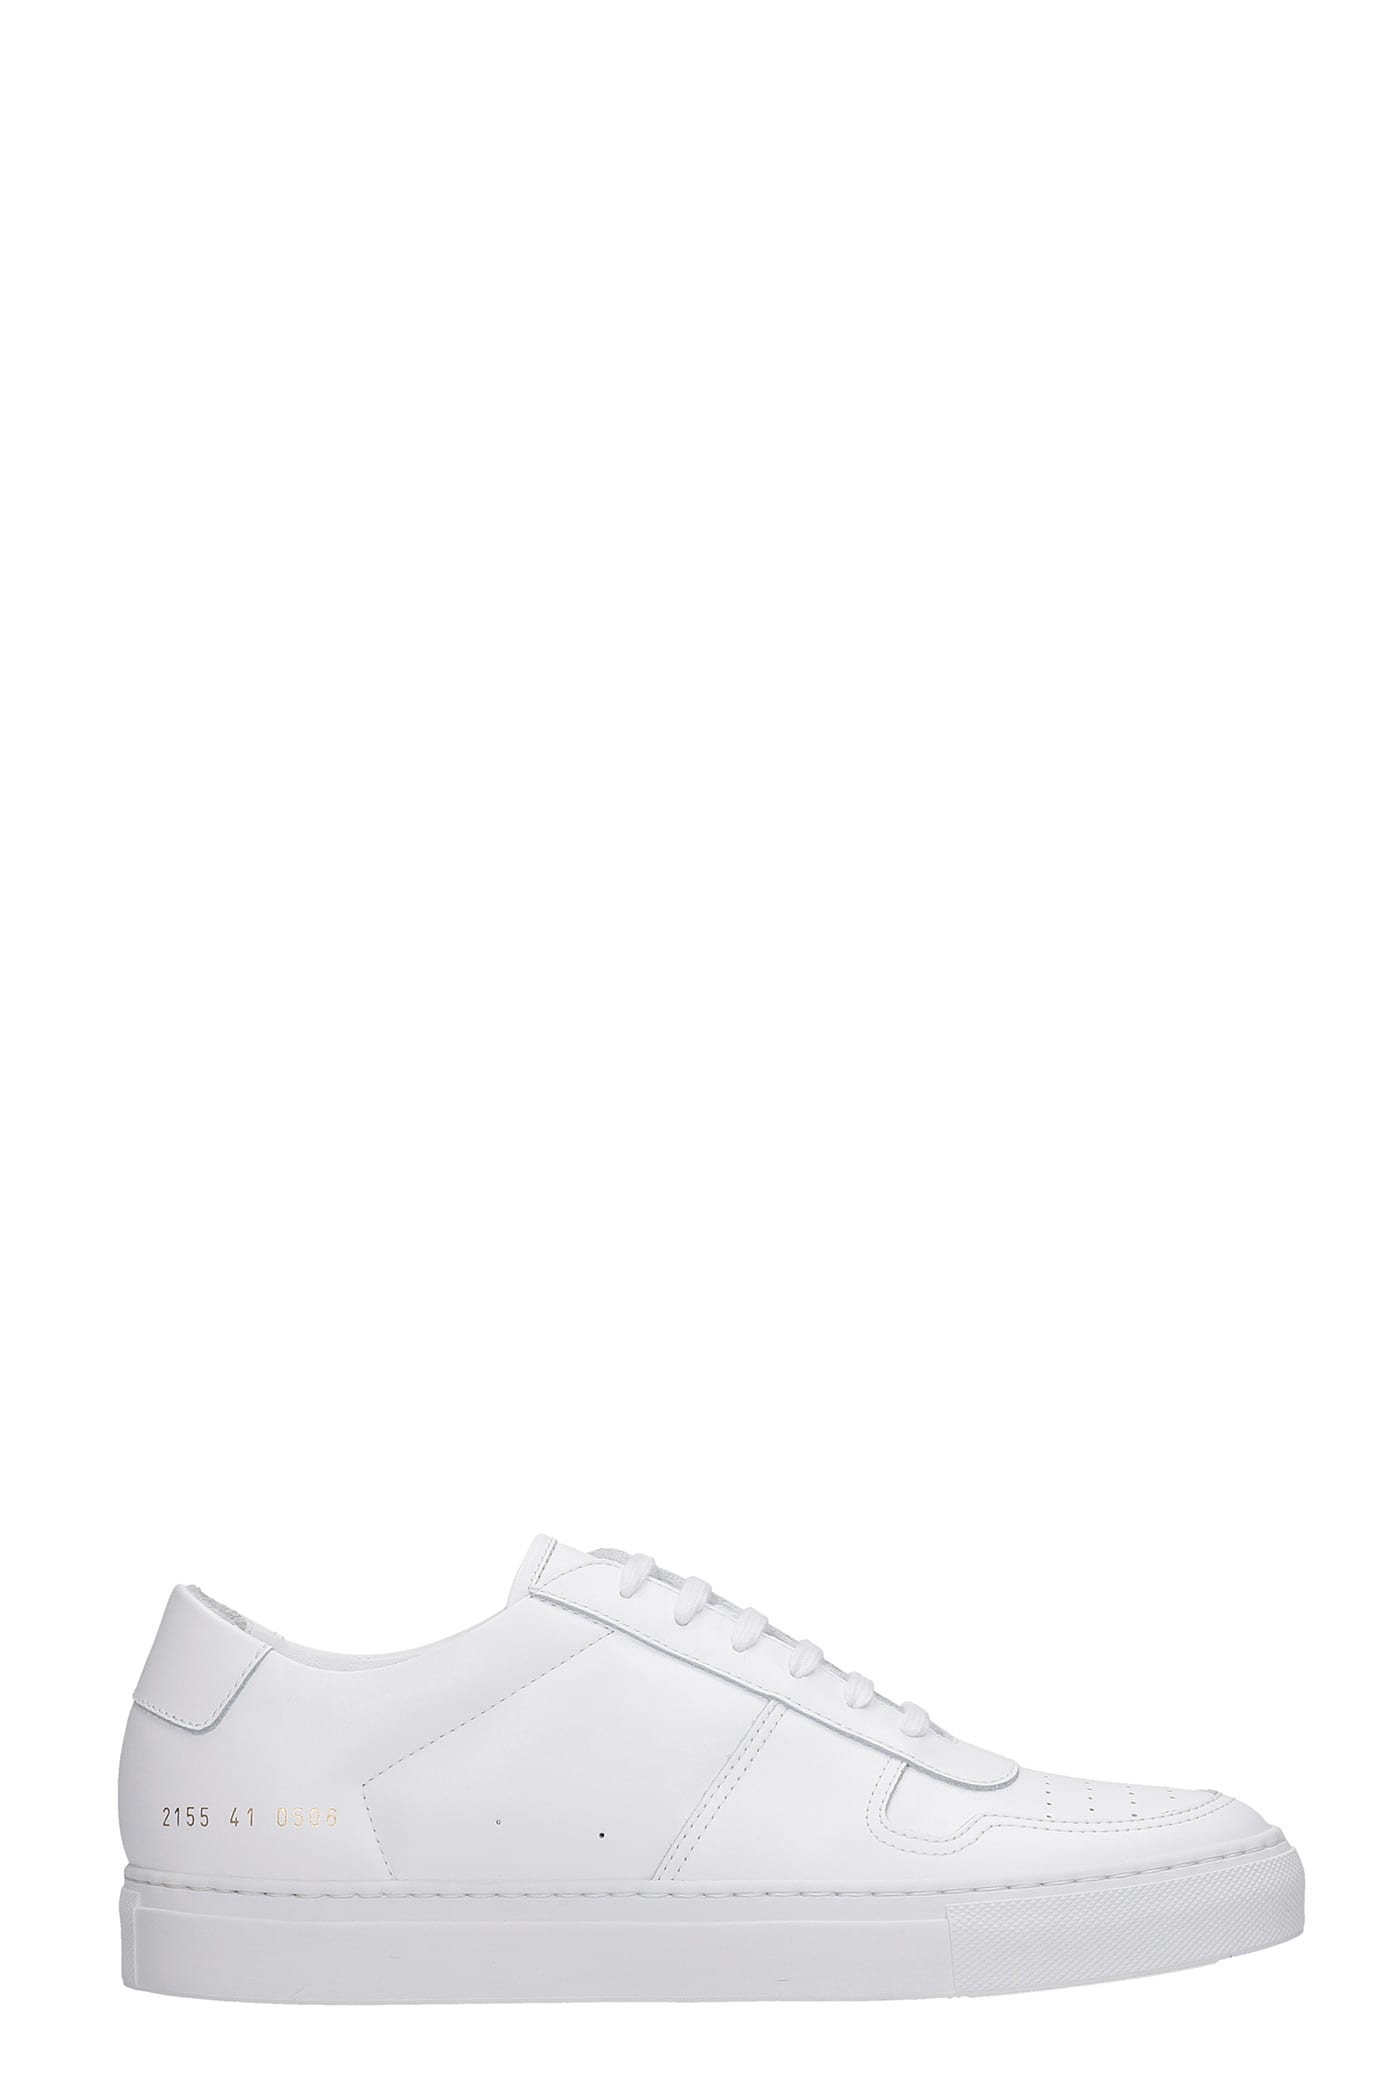 COMMON PROJECTS B-BALL SNEAKERS IN WHITE LEATHER,21550506